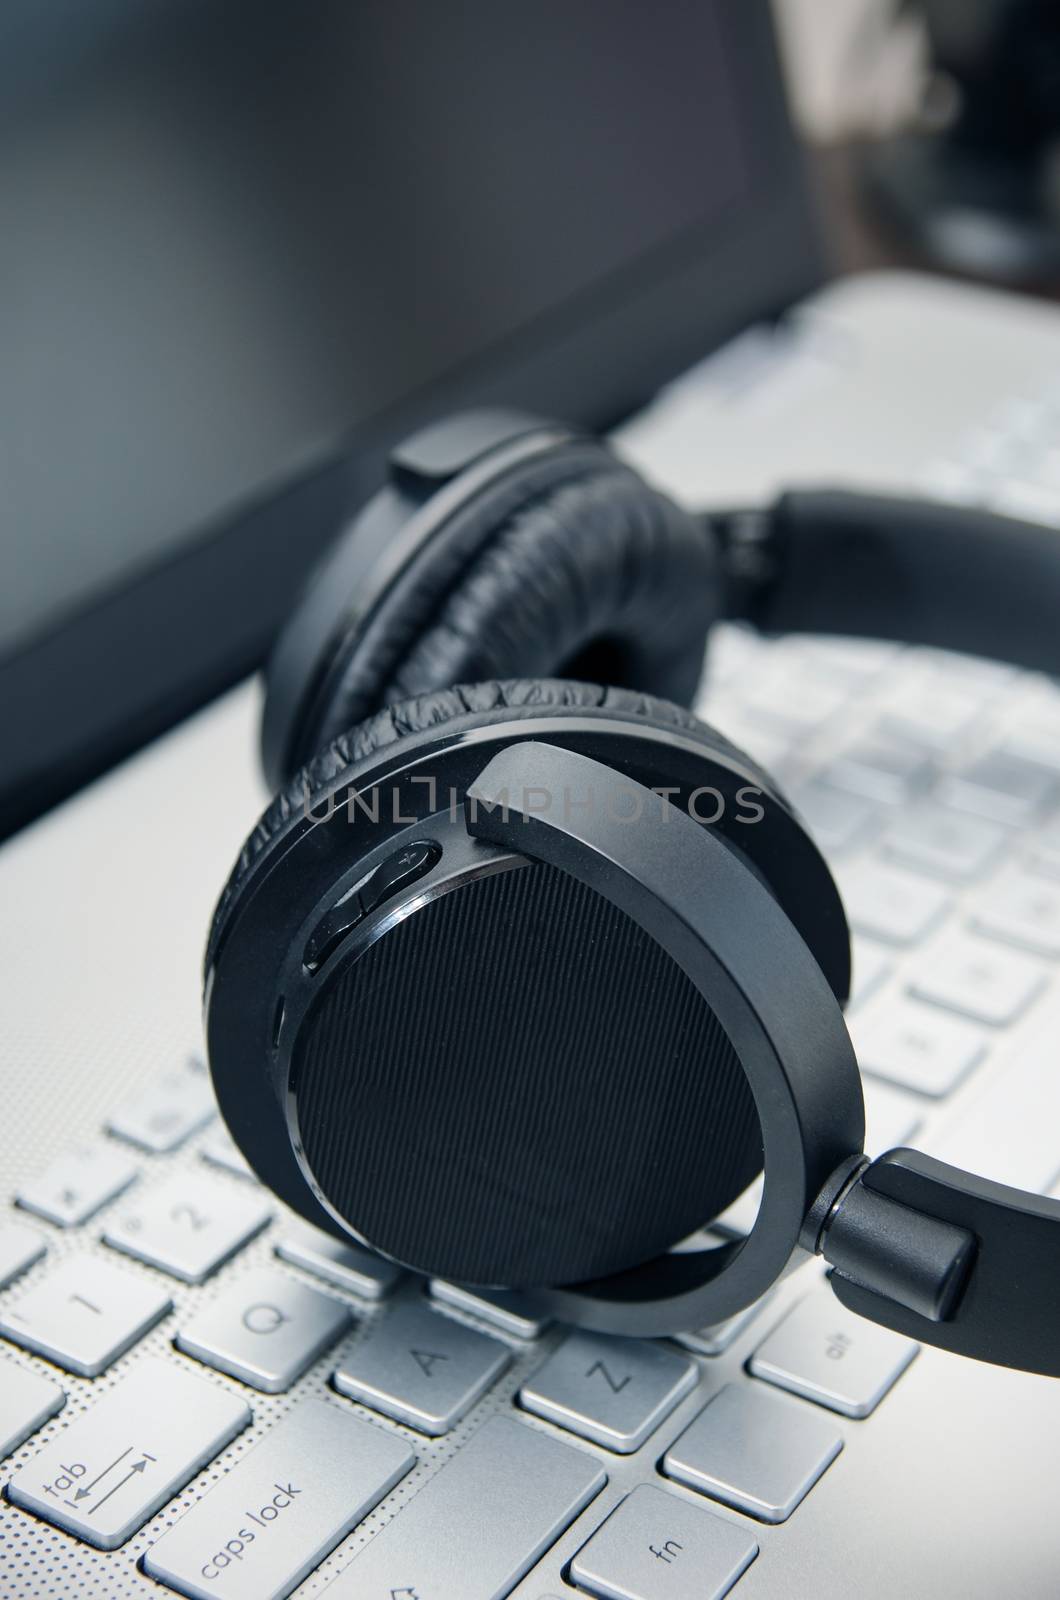 Wireless headphones on laptop keyboard. Music and gaming concept by simpson33